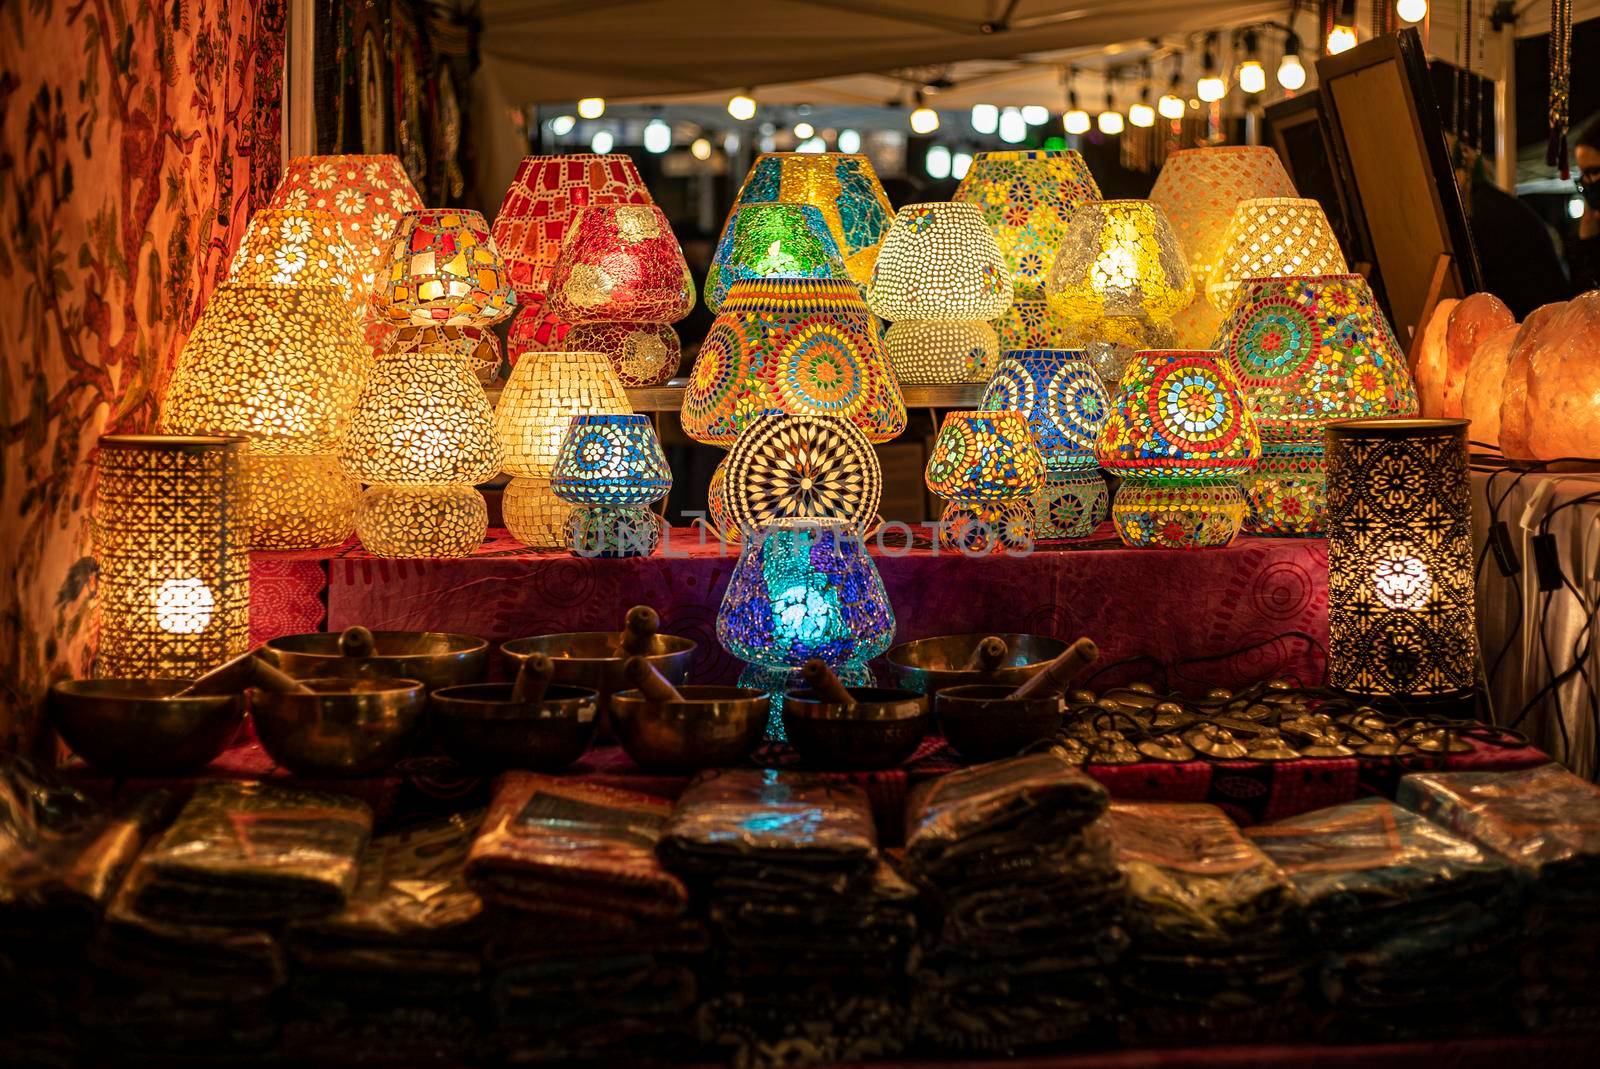 Arabic exhibition lamps in a market by pippocarlot